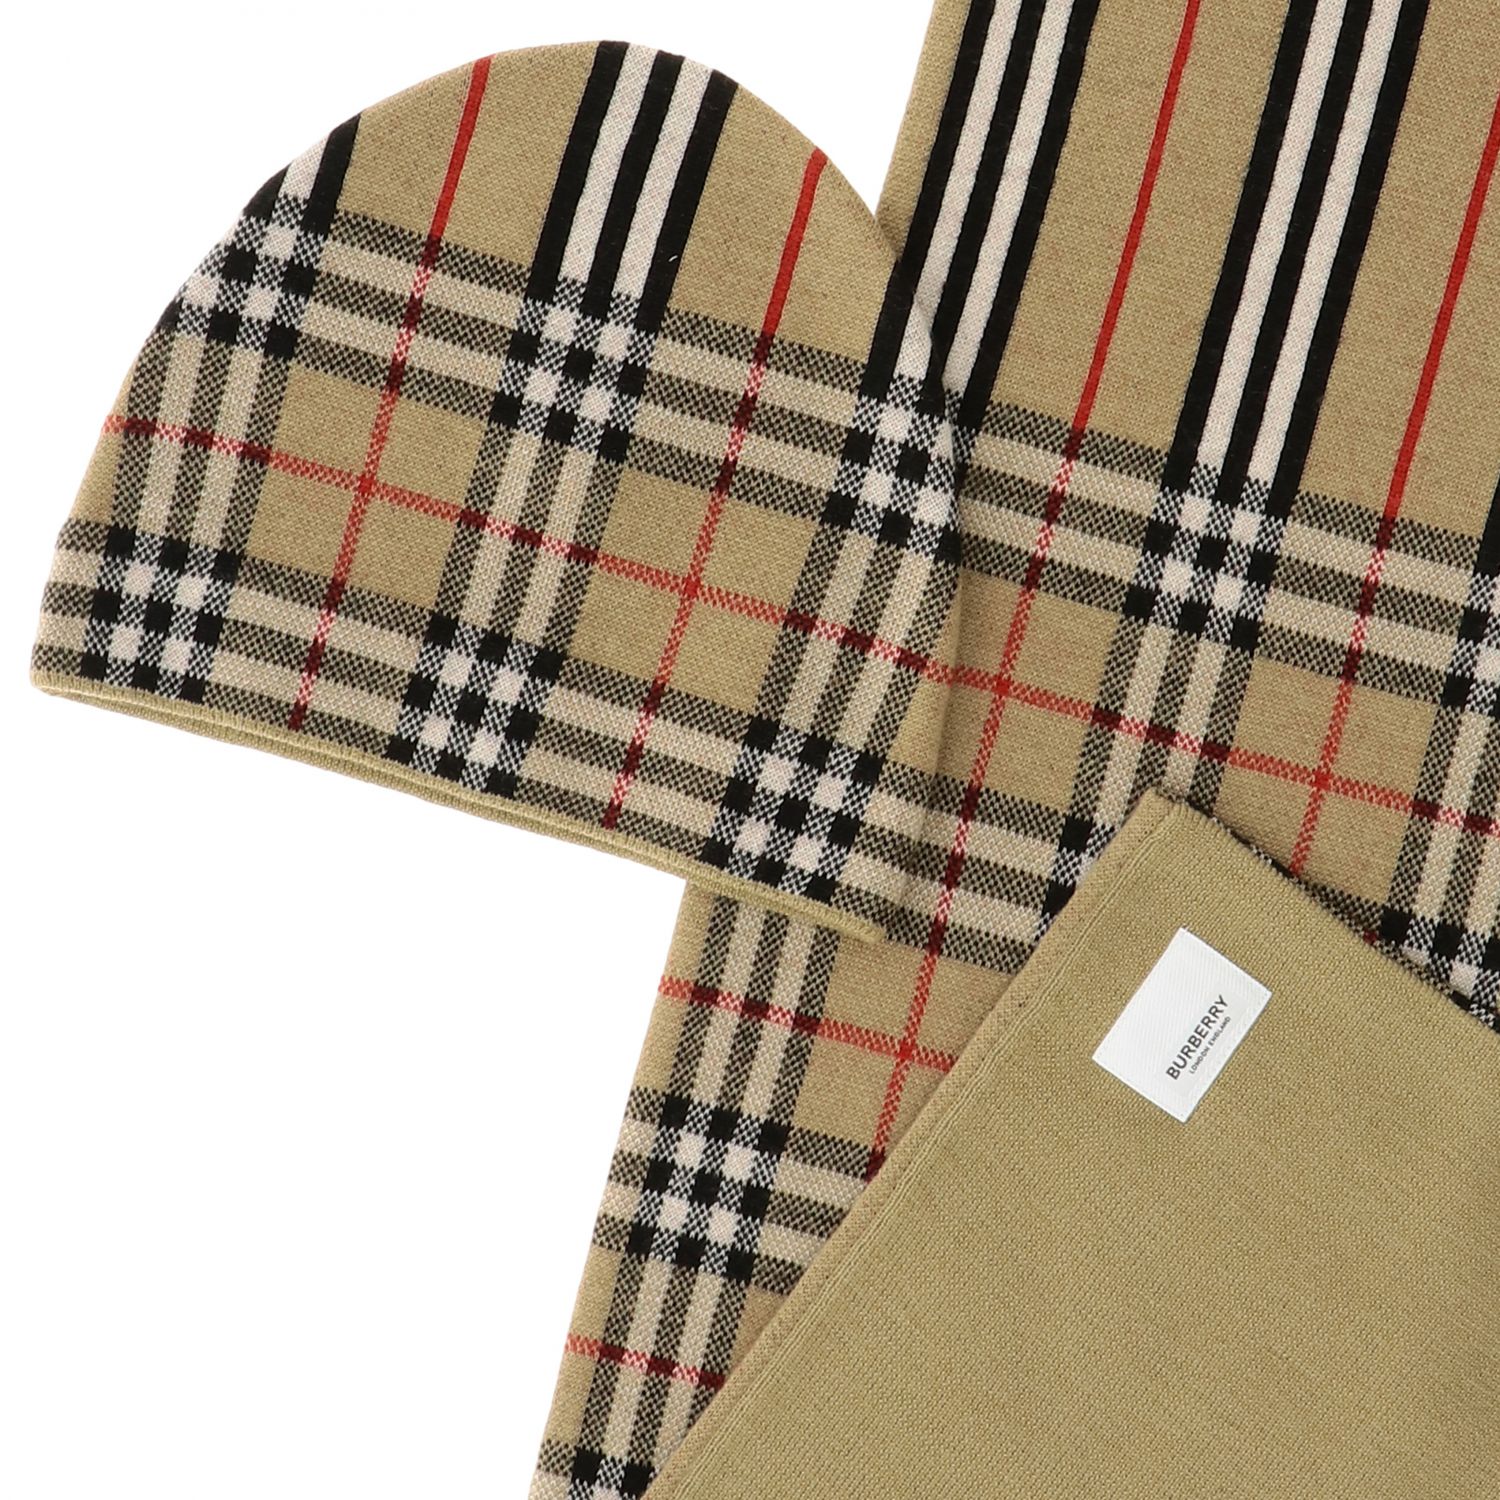 burberry scarf and hat